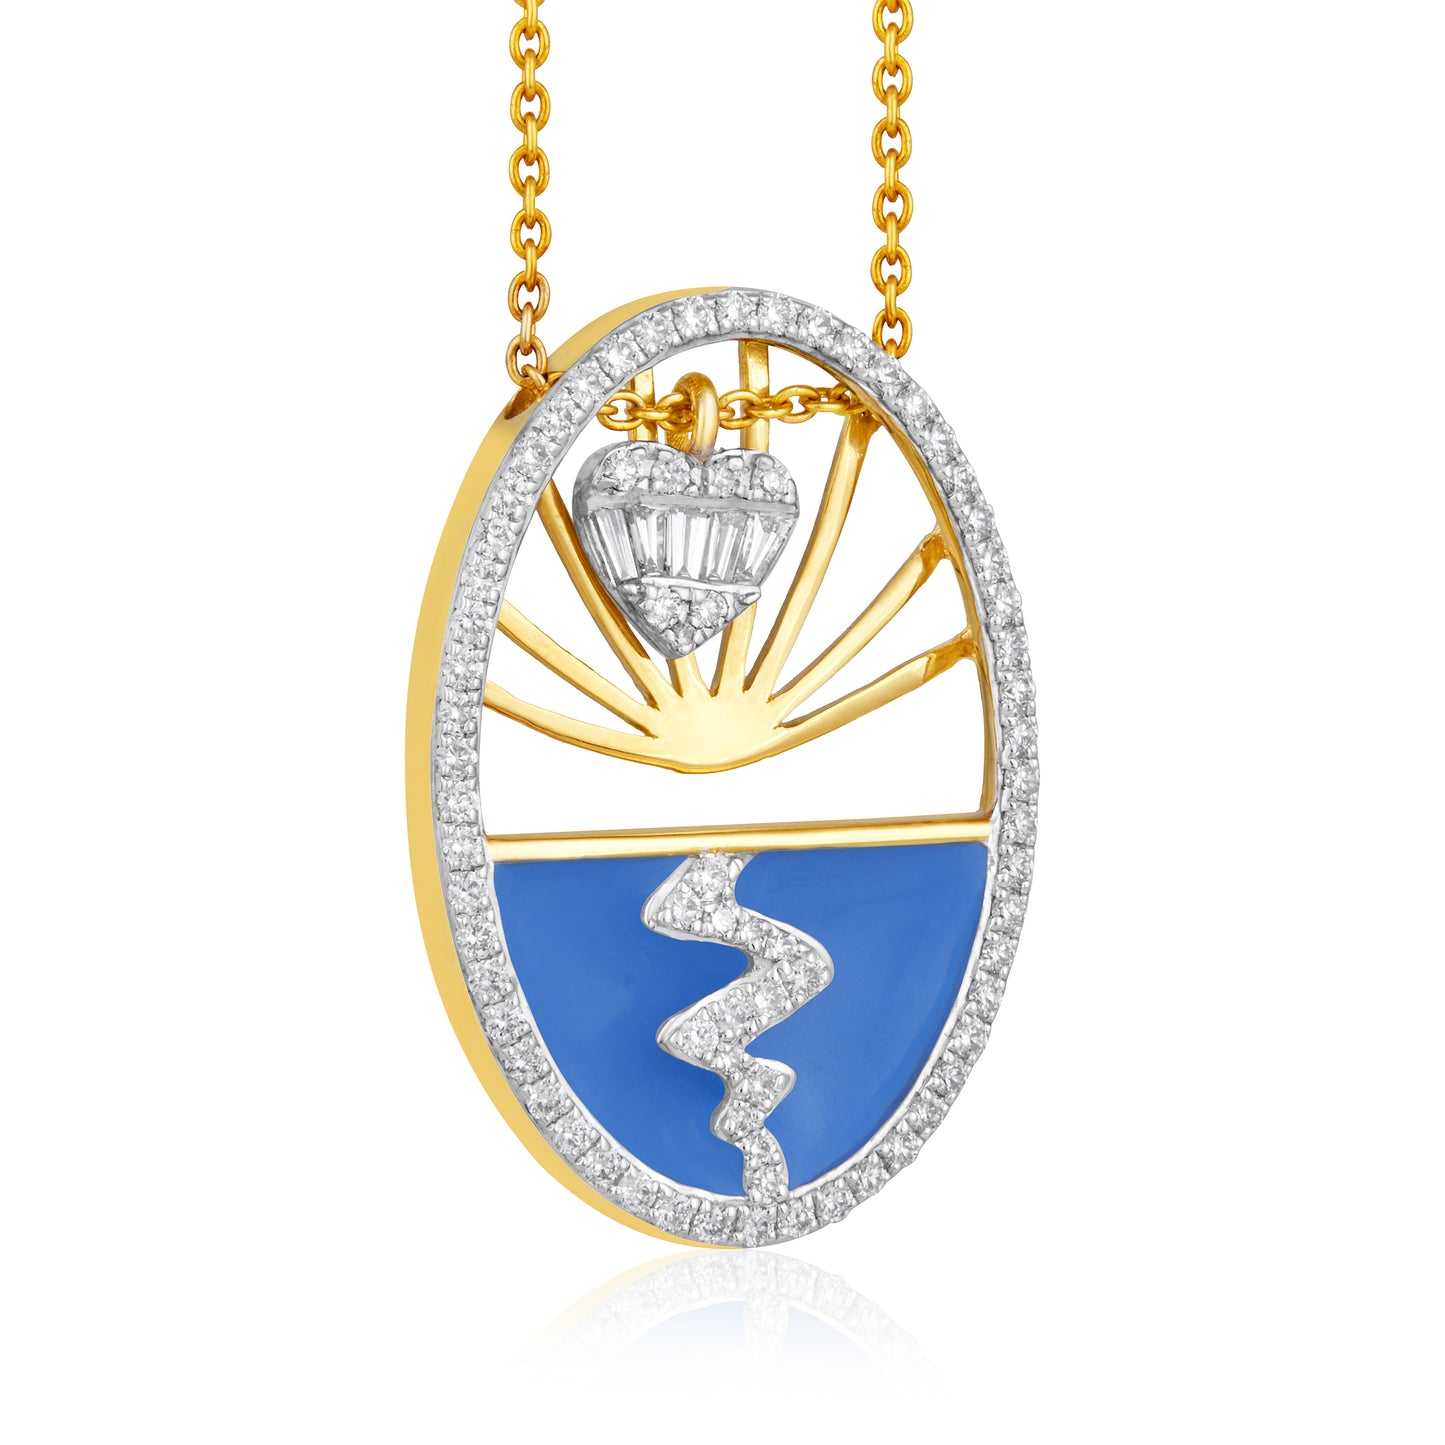 Lake of Love Pendant with Chain